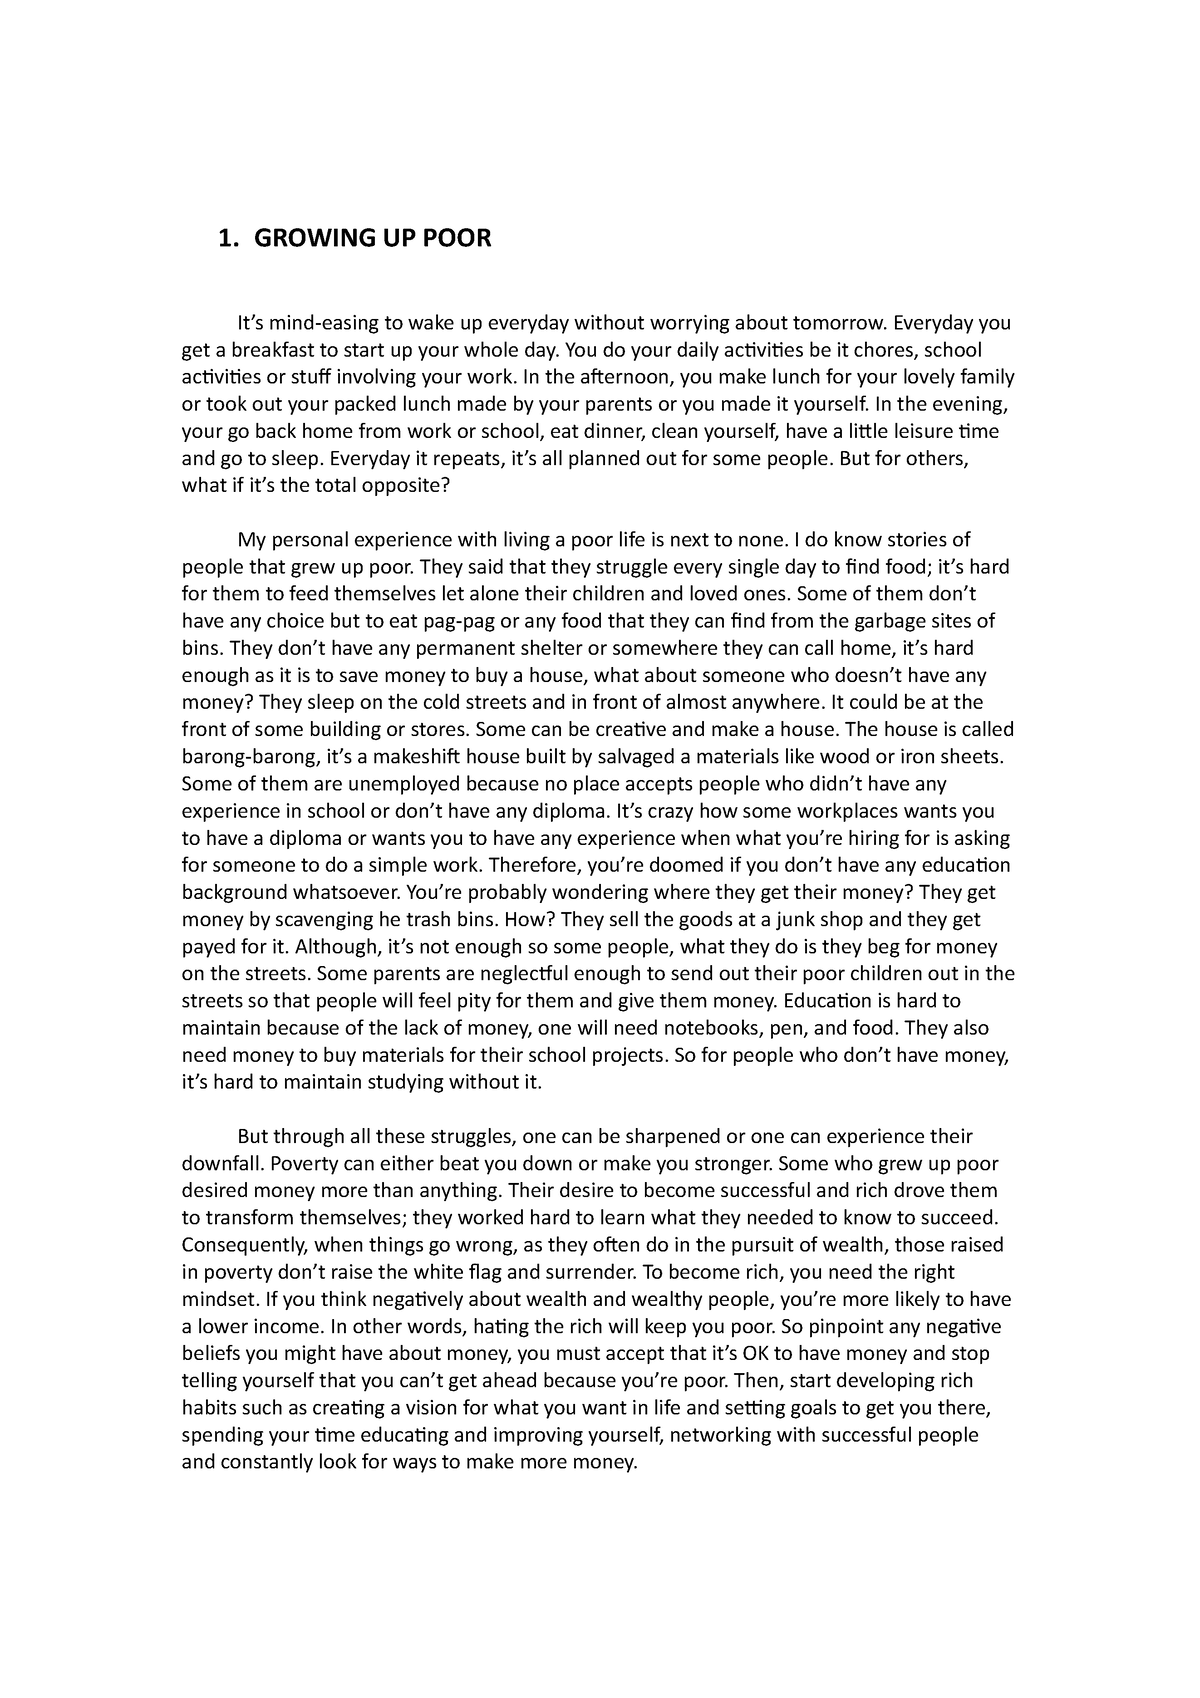 college essay about growing up poor